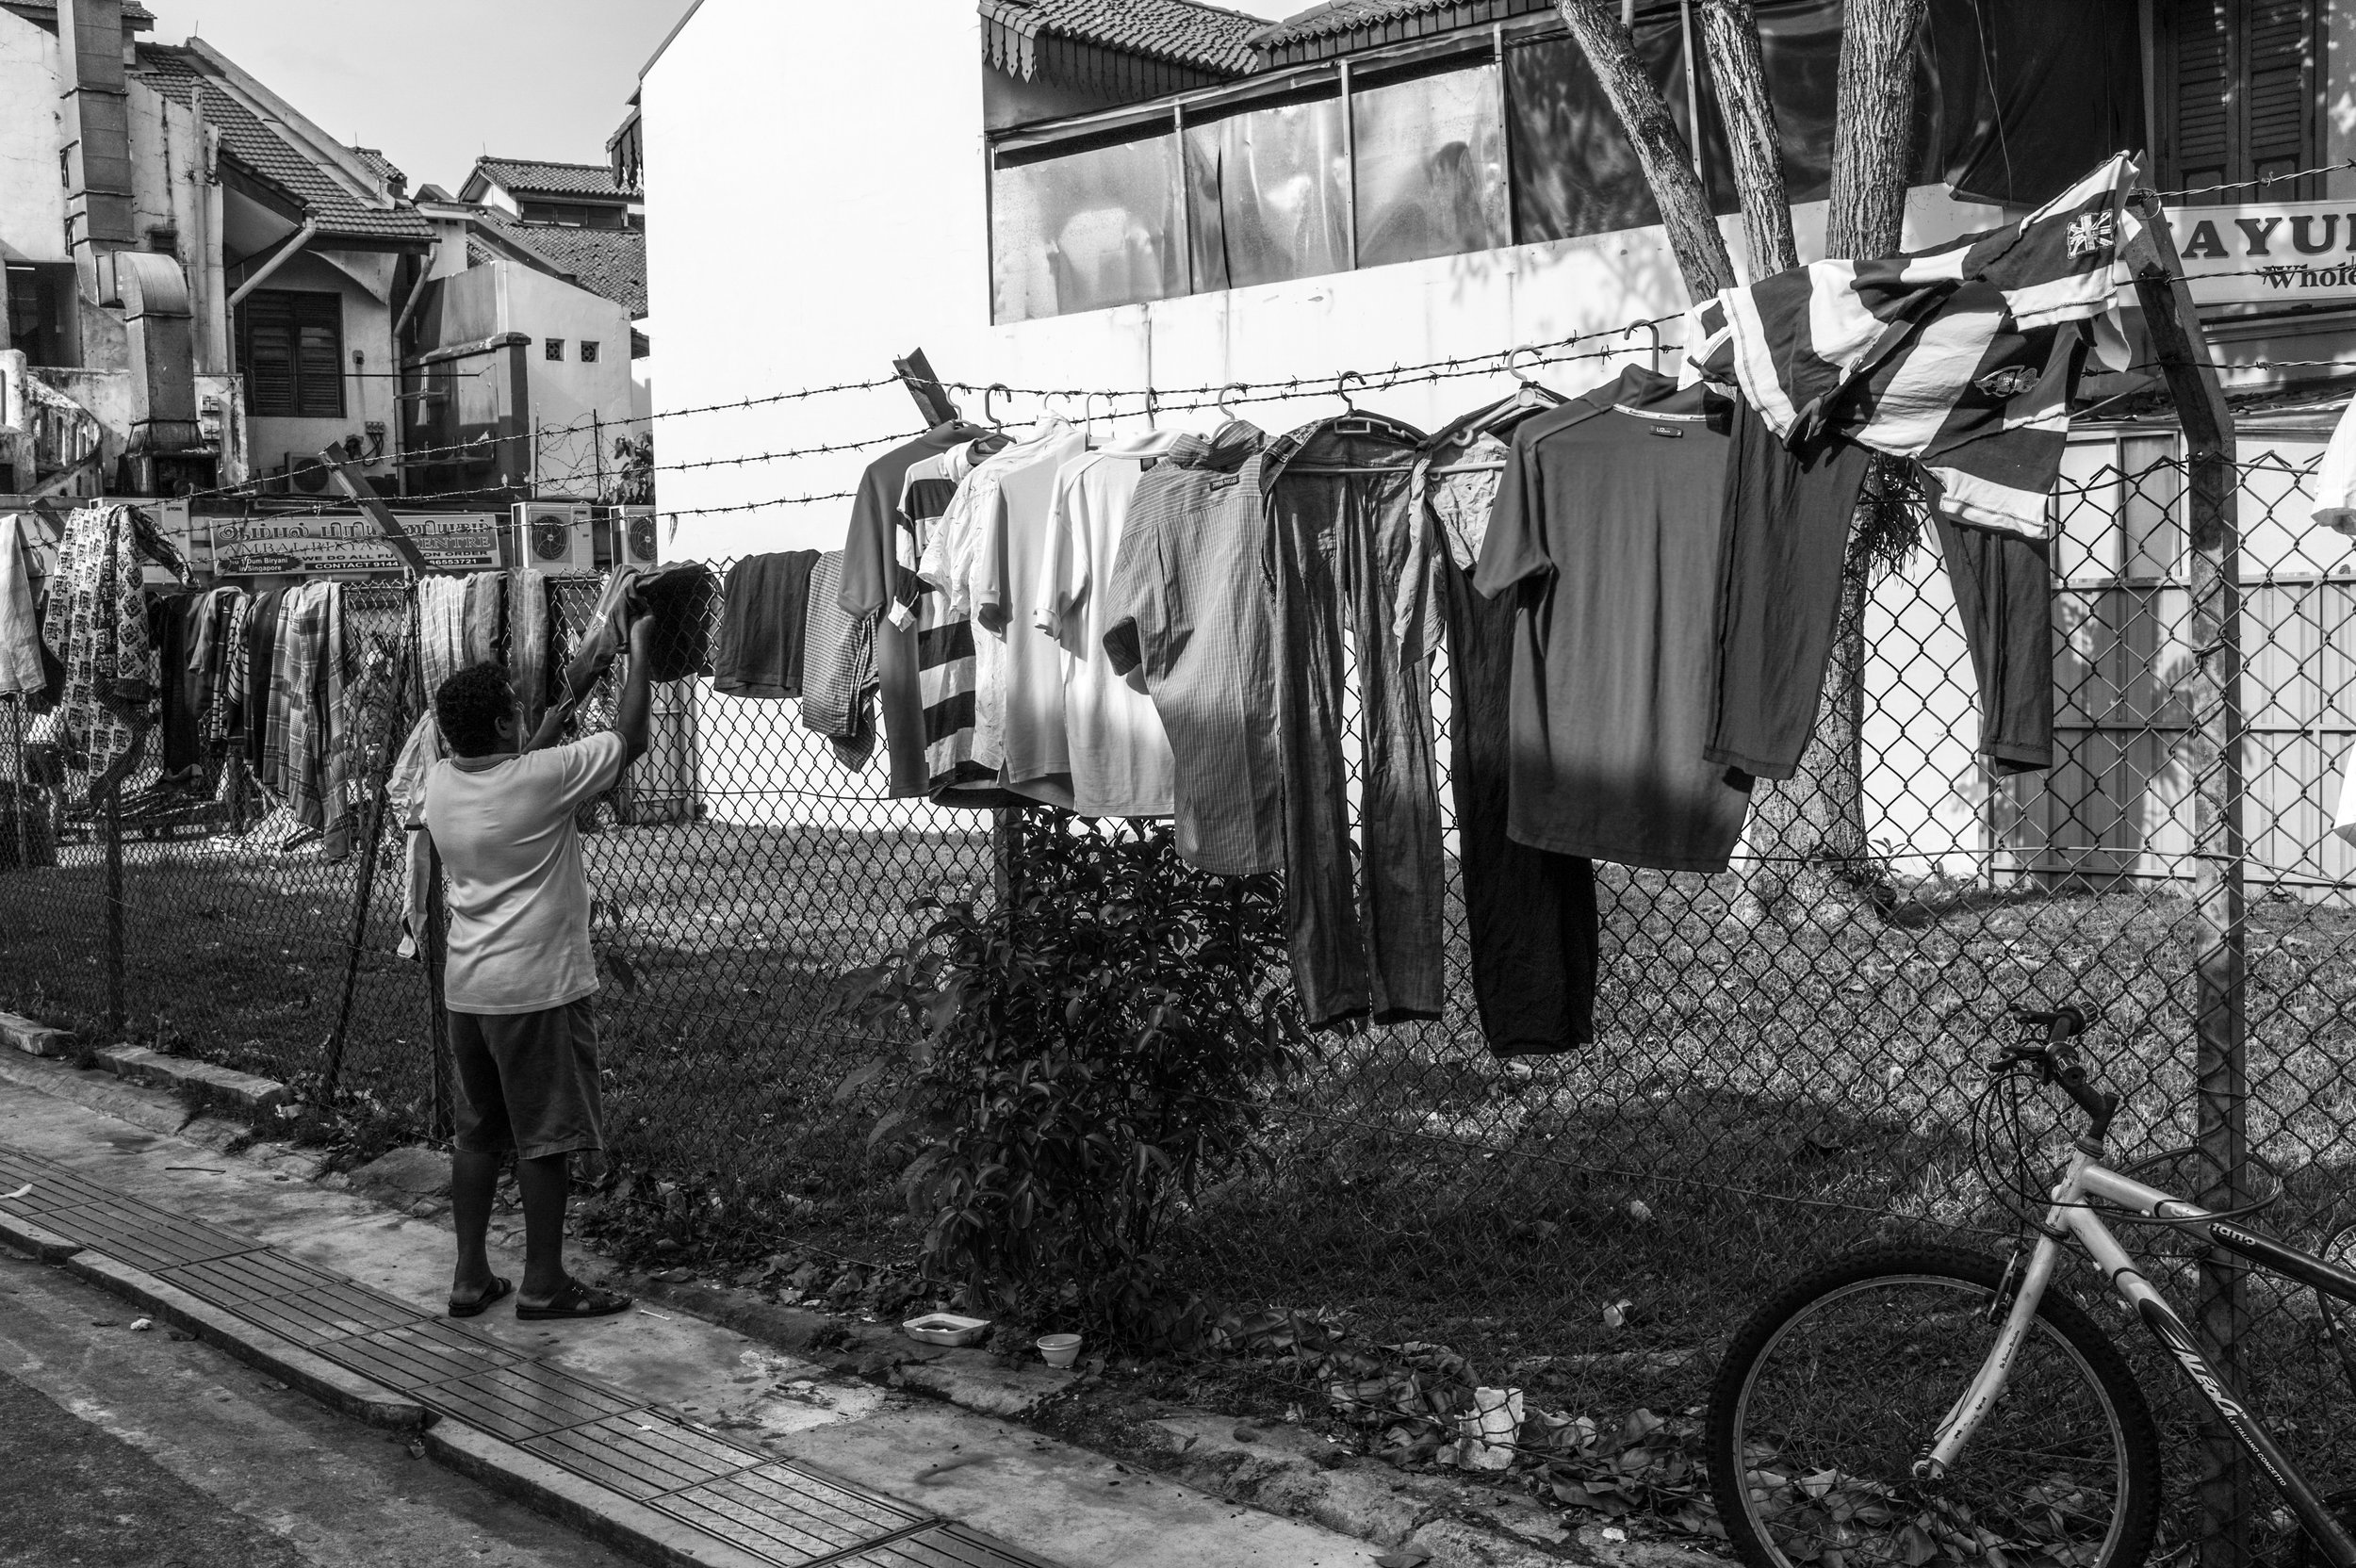   Dhoby.&nbsp; A man openly airs and displays his laundry among his contemporaries' along an alleyway.&nbsp; 